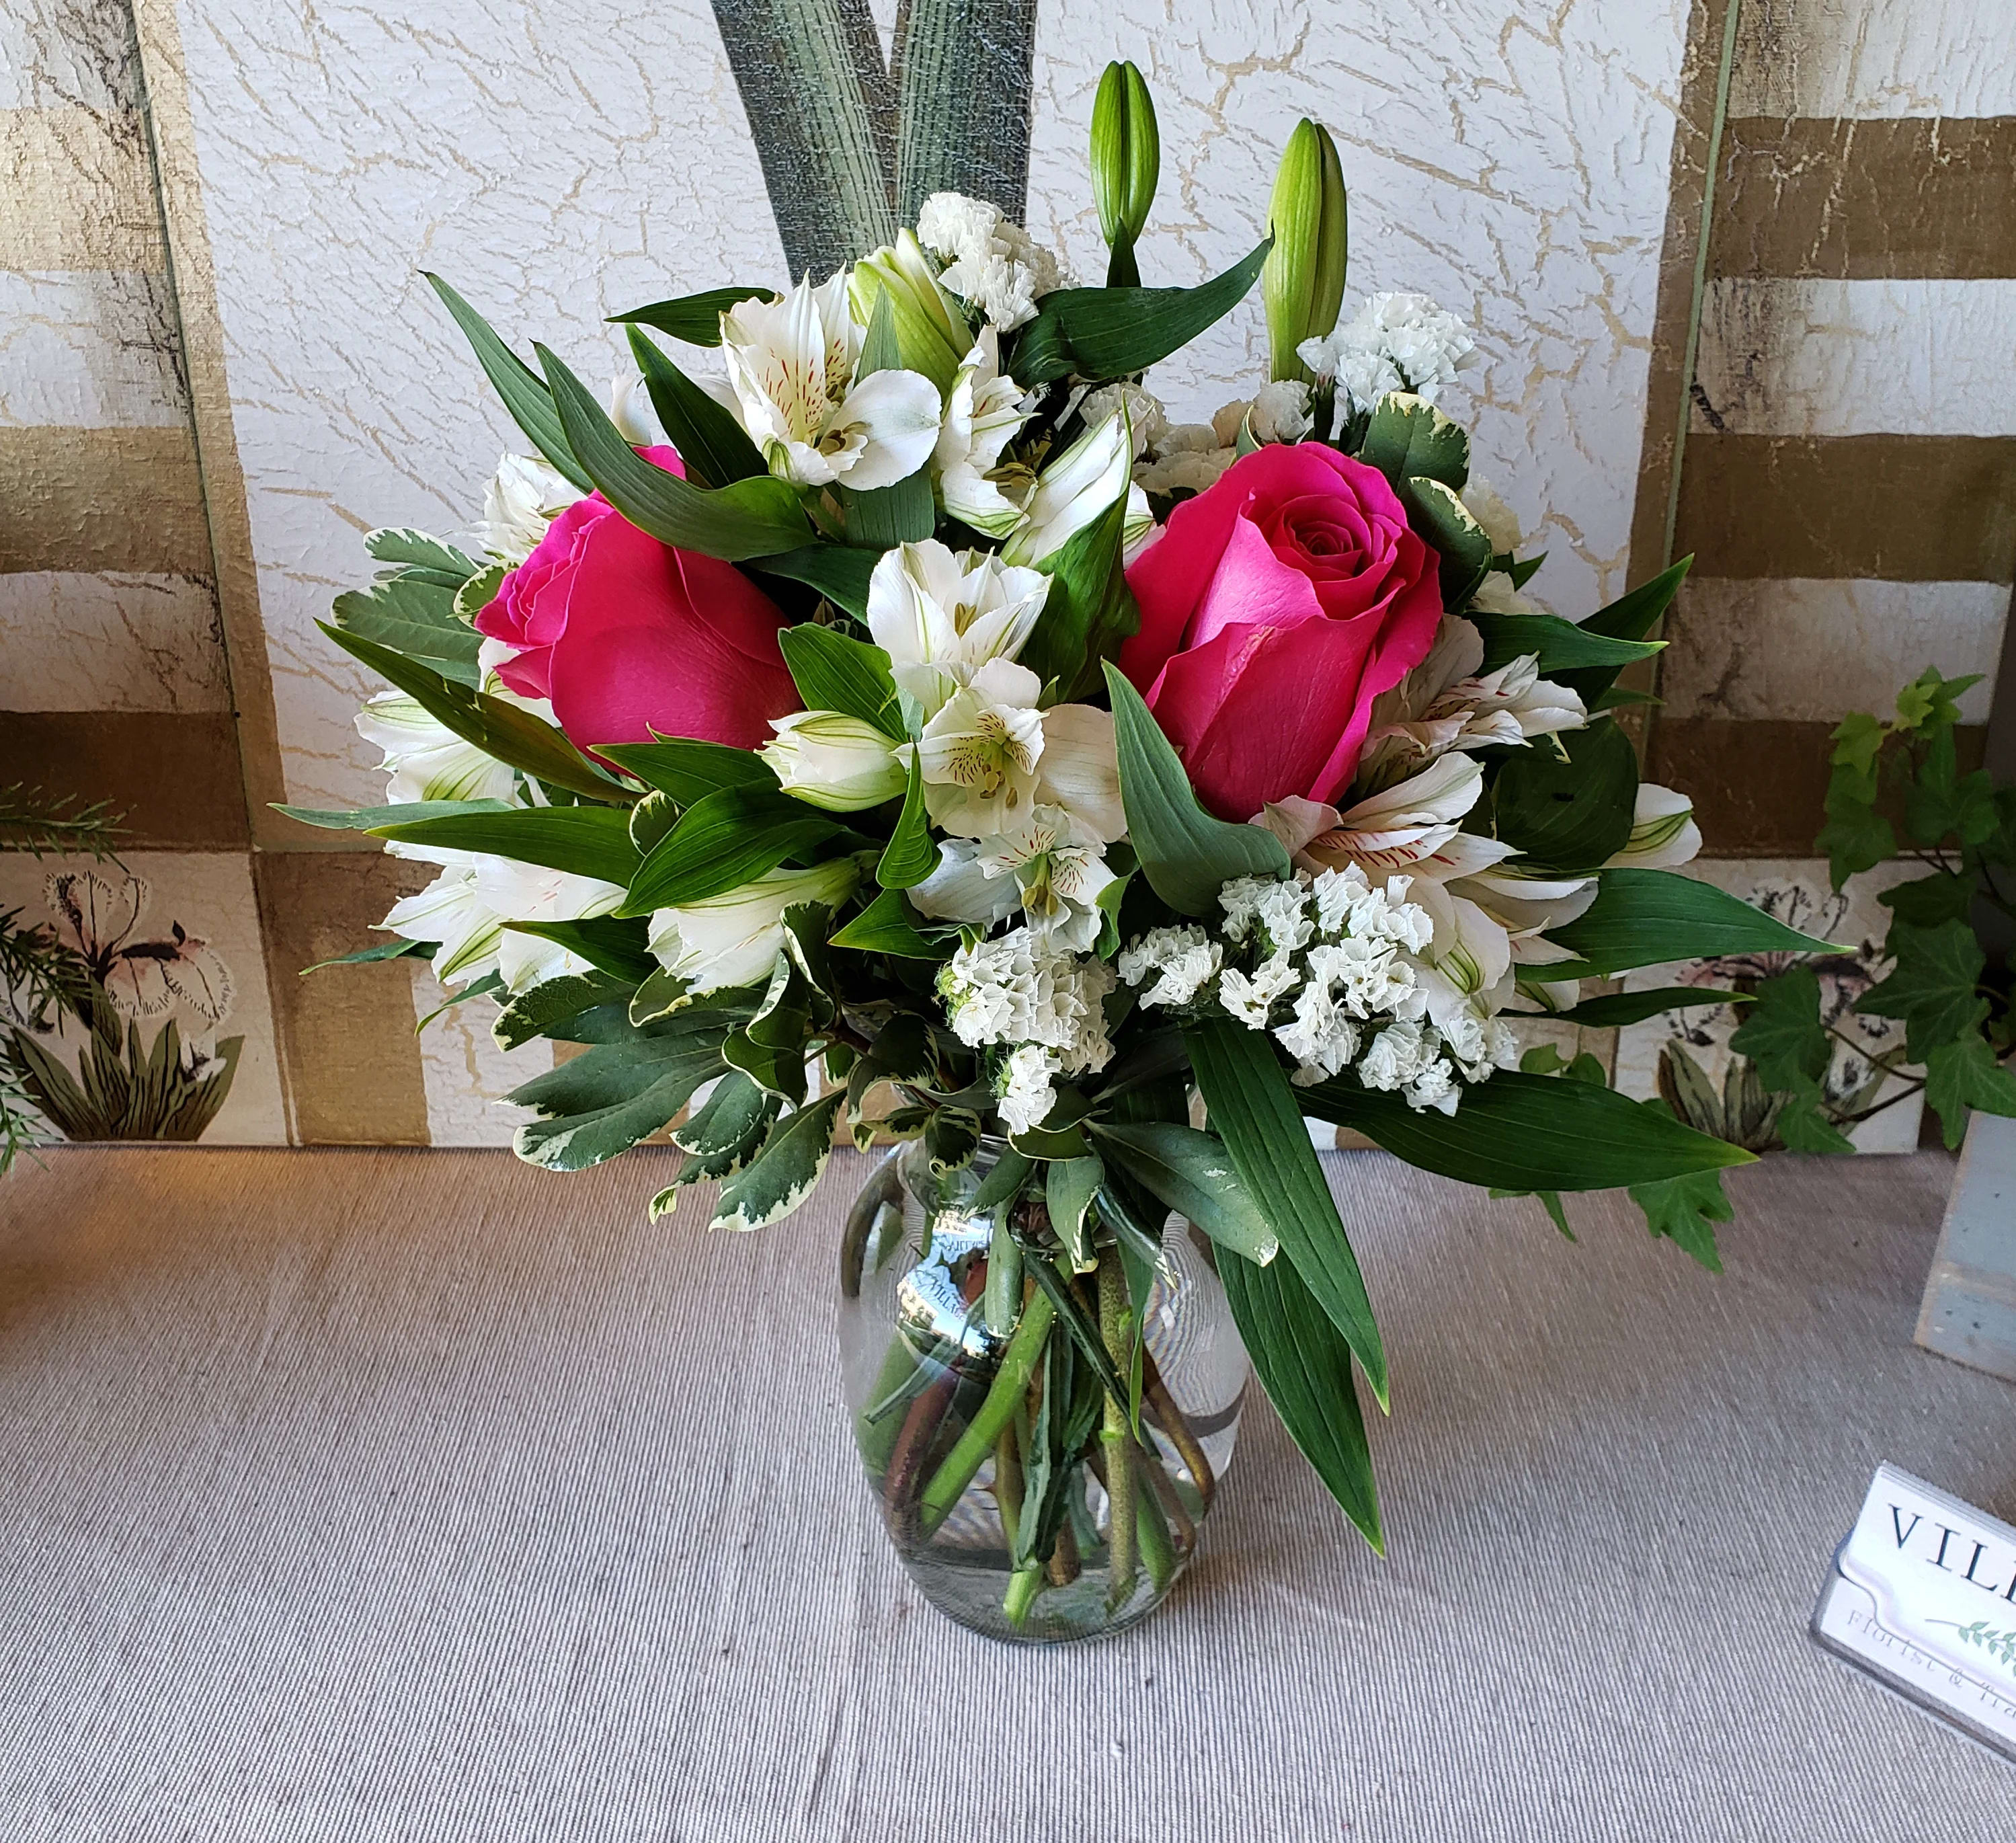 Classy and Sassy - Classy and Sassy is an elegant mix of white lilies, white Alstroemeria and white Statice with a Sassy pop of Pink Floyd Roses. Tastefully arranged in a clear glass vase. 